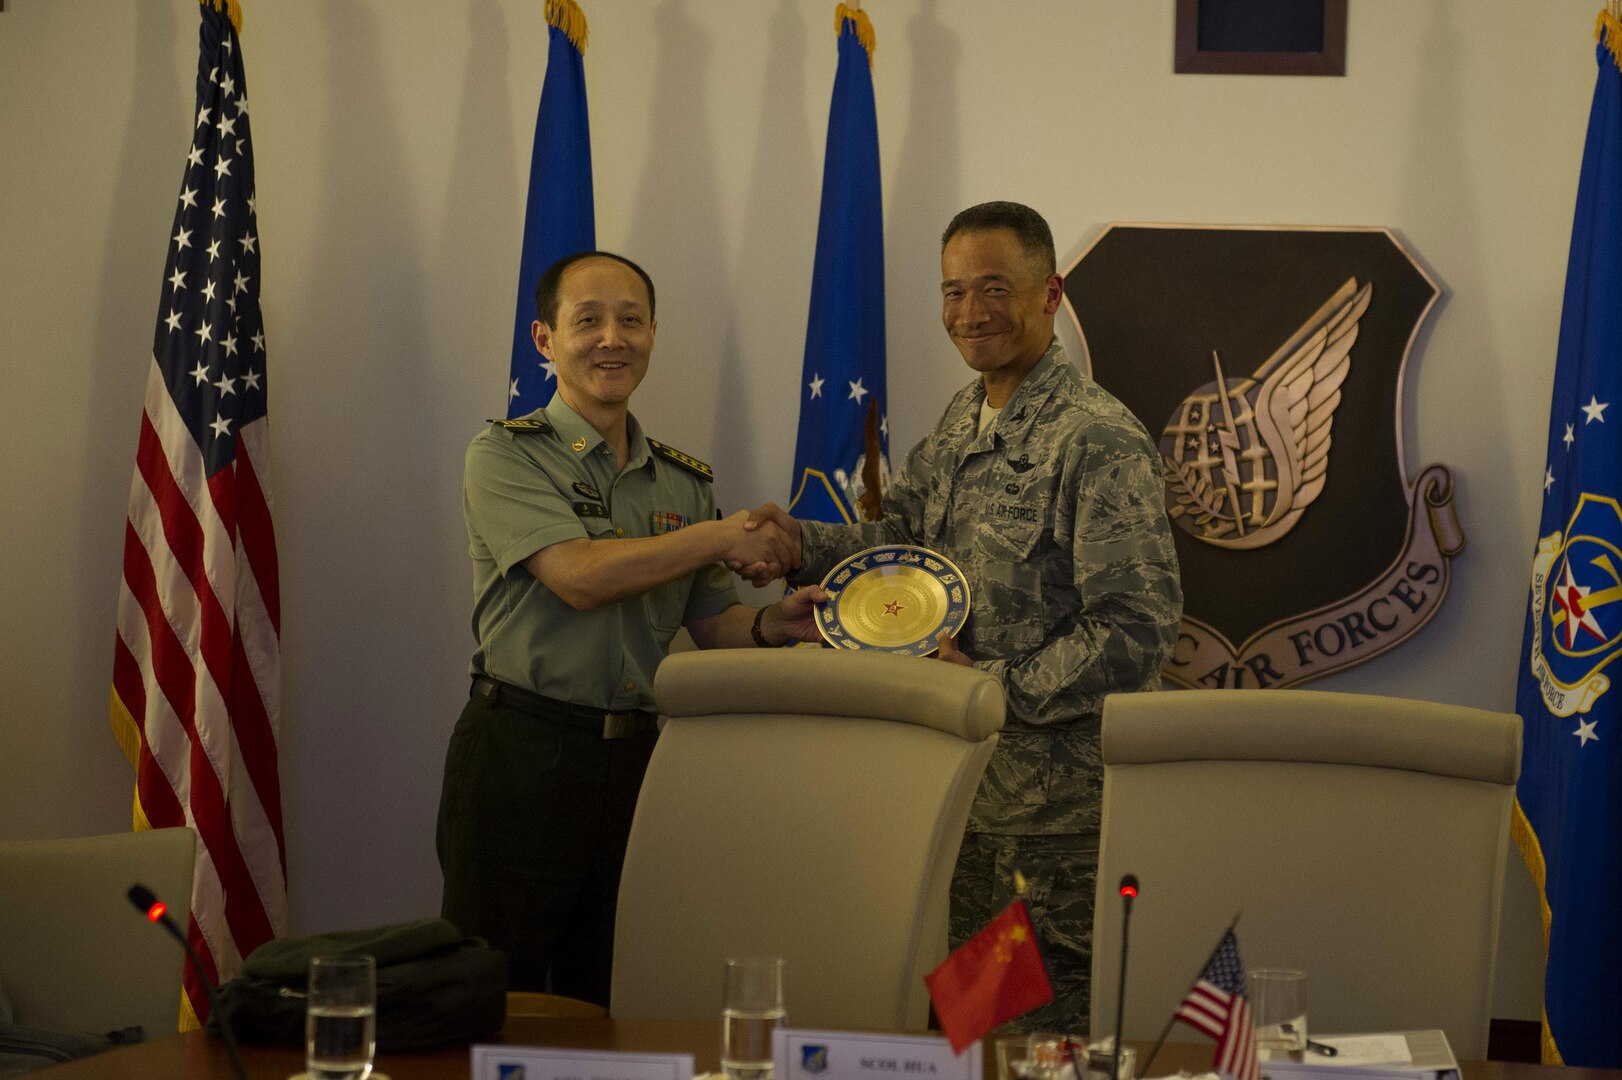 People's Liberation Army Senior Col. Hua Bo and U.S. Air Force Col. Art Primas, Pacific Air Forces International Affairs division chief, exchange gifts following a mid-level officer exchange at Joint Base Pearl Harbor-Hickam, Hawaii, Oct. 18, 2016. The PLA delegation visited PACAF as part of an annual exchange tour that included a stop at U.S. Pacific Command. (U.S. Air Force photo by Staff Sgt. Alexander Martinez)